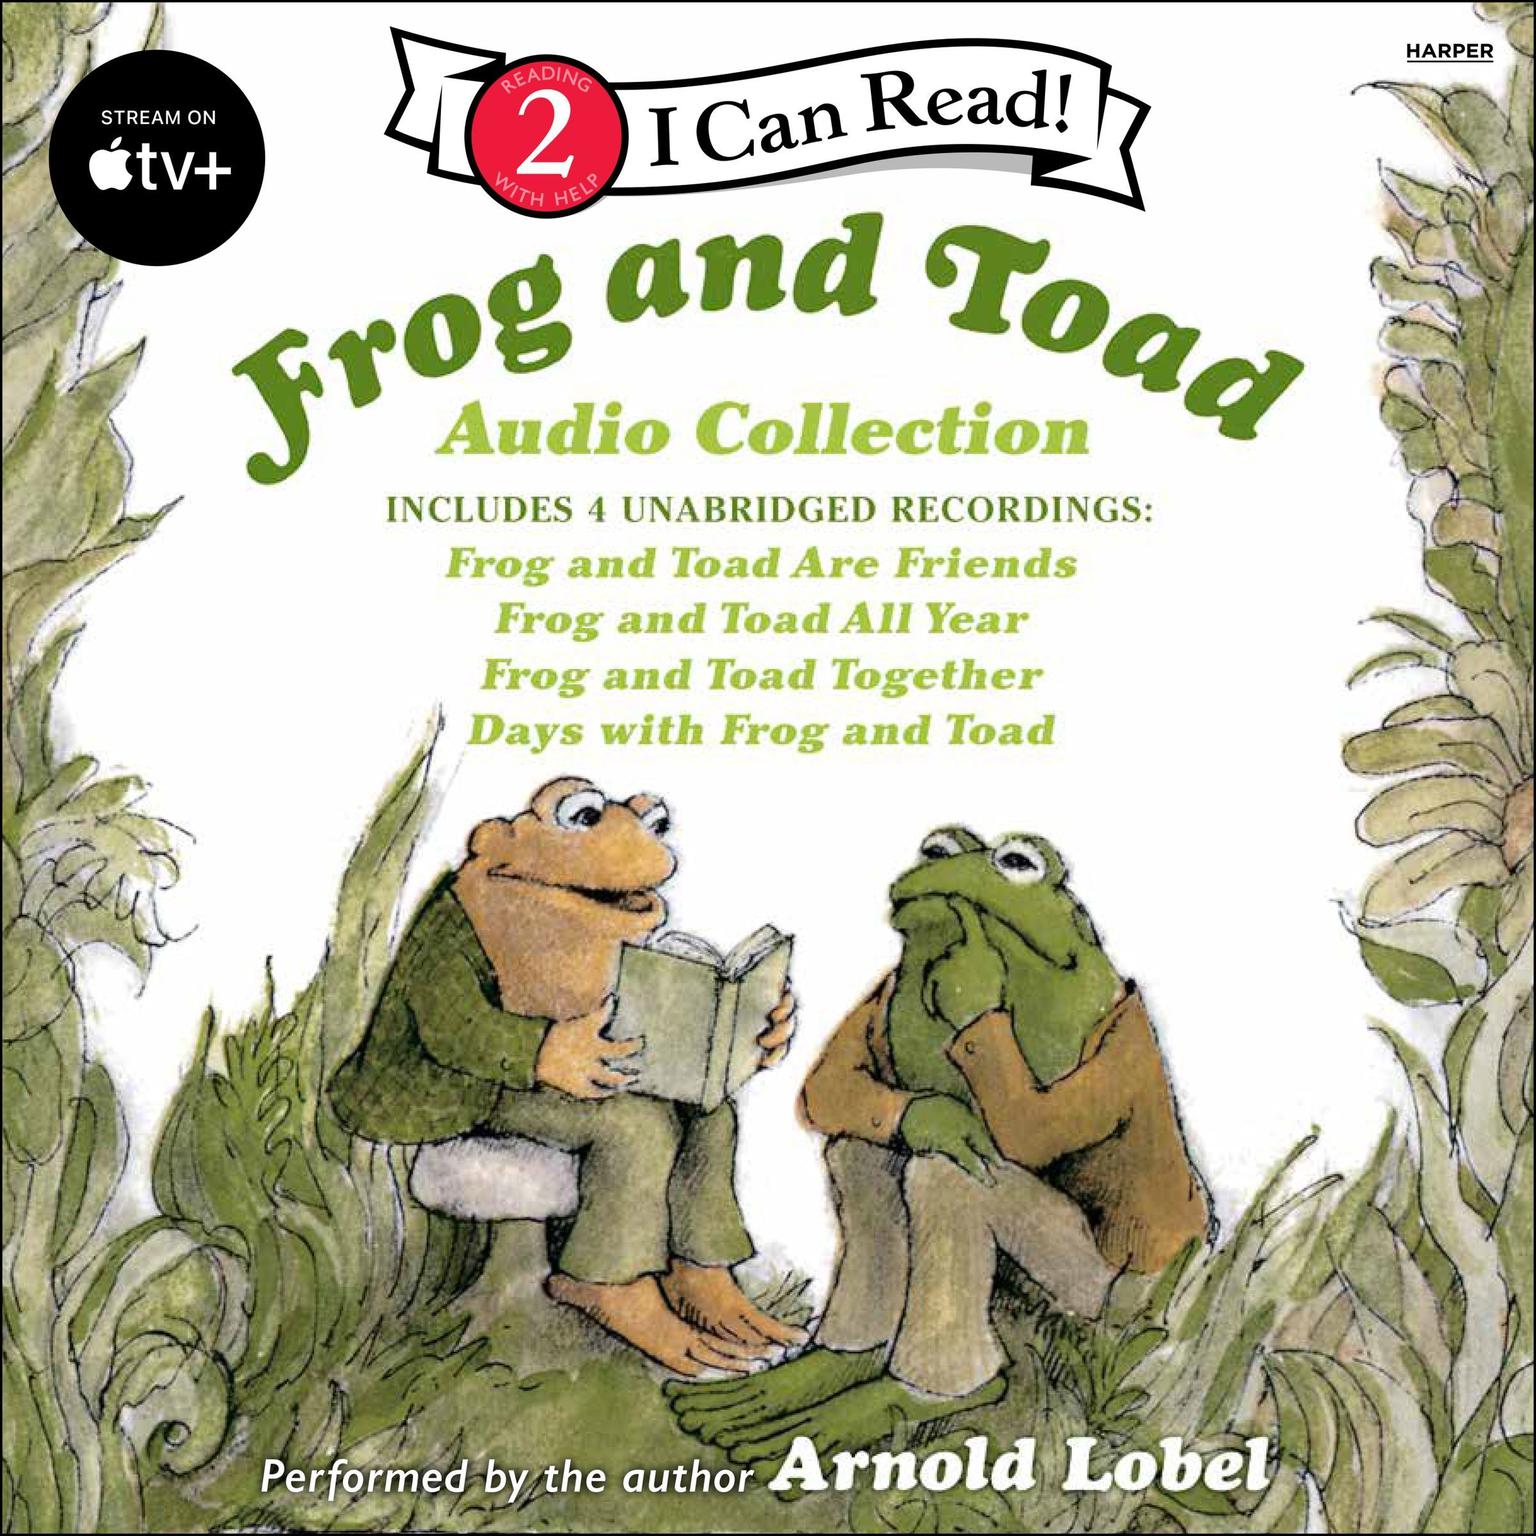 Frog and Toad Audio Collection Audiobook, by Arnold Lobel